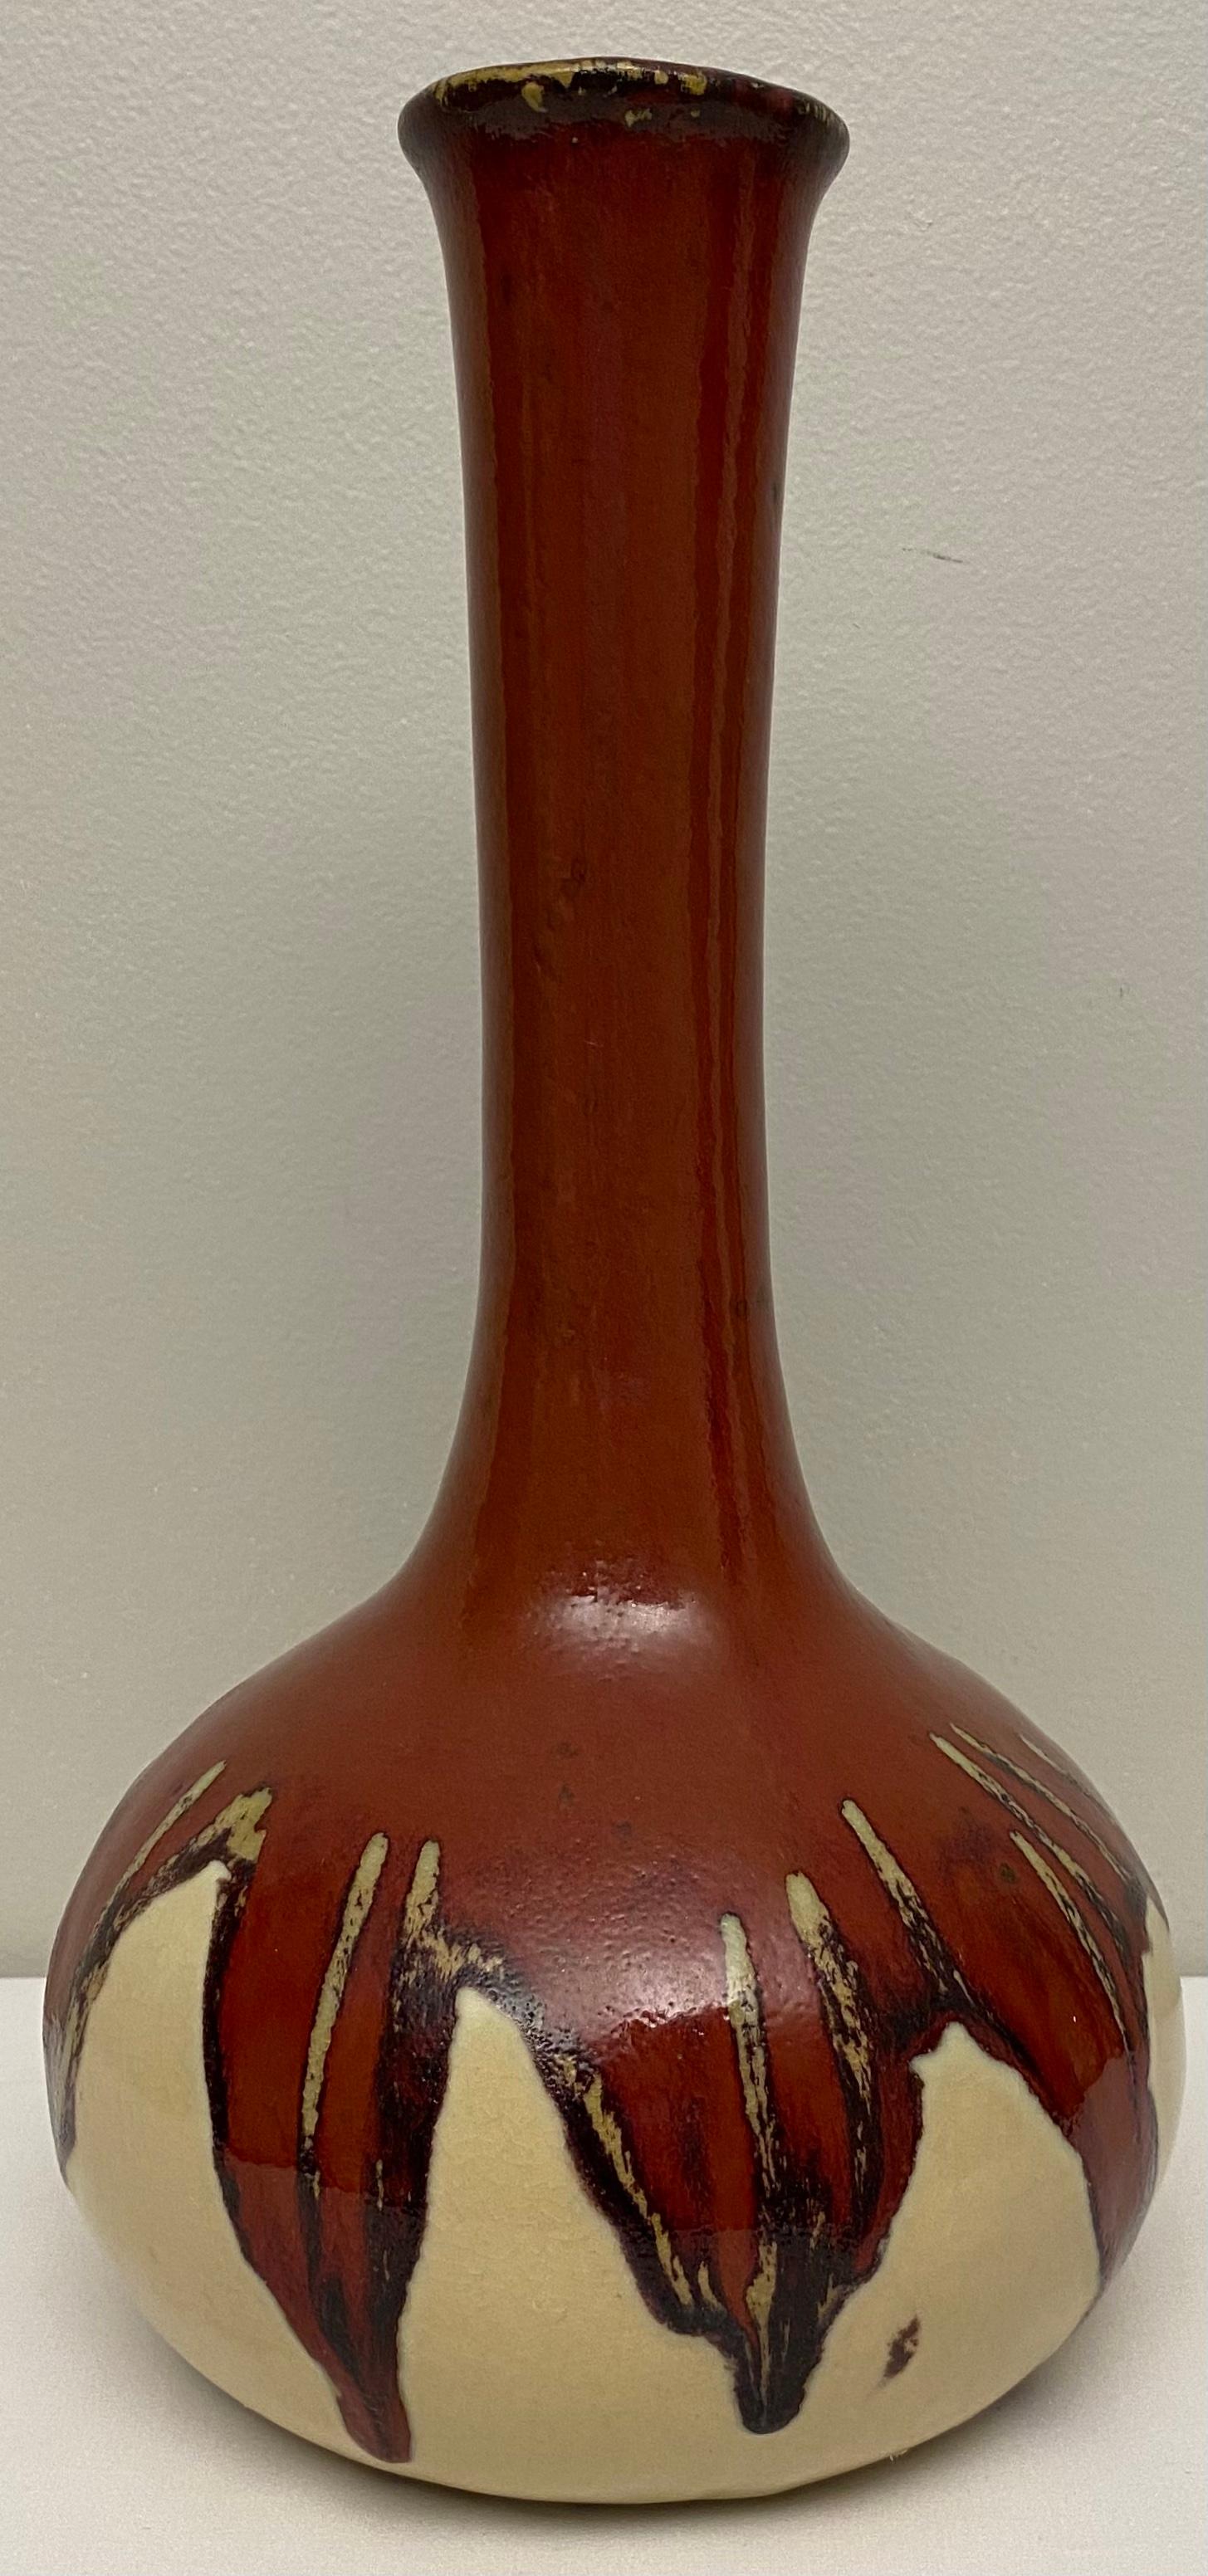 A nice quality Southwest Native American style ceramic vase. 
Neutral hues makes this vase particularly suitable for rustic or contemporary settings. 

Perfect for displaying your favorite flowers on a table, counter top or shelf. 

Measures: 16